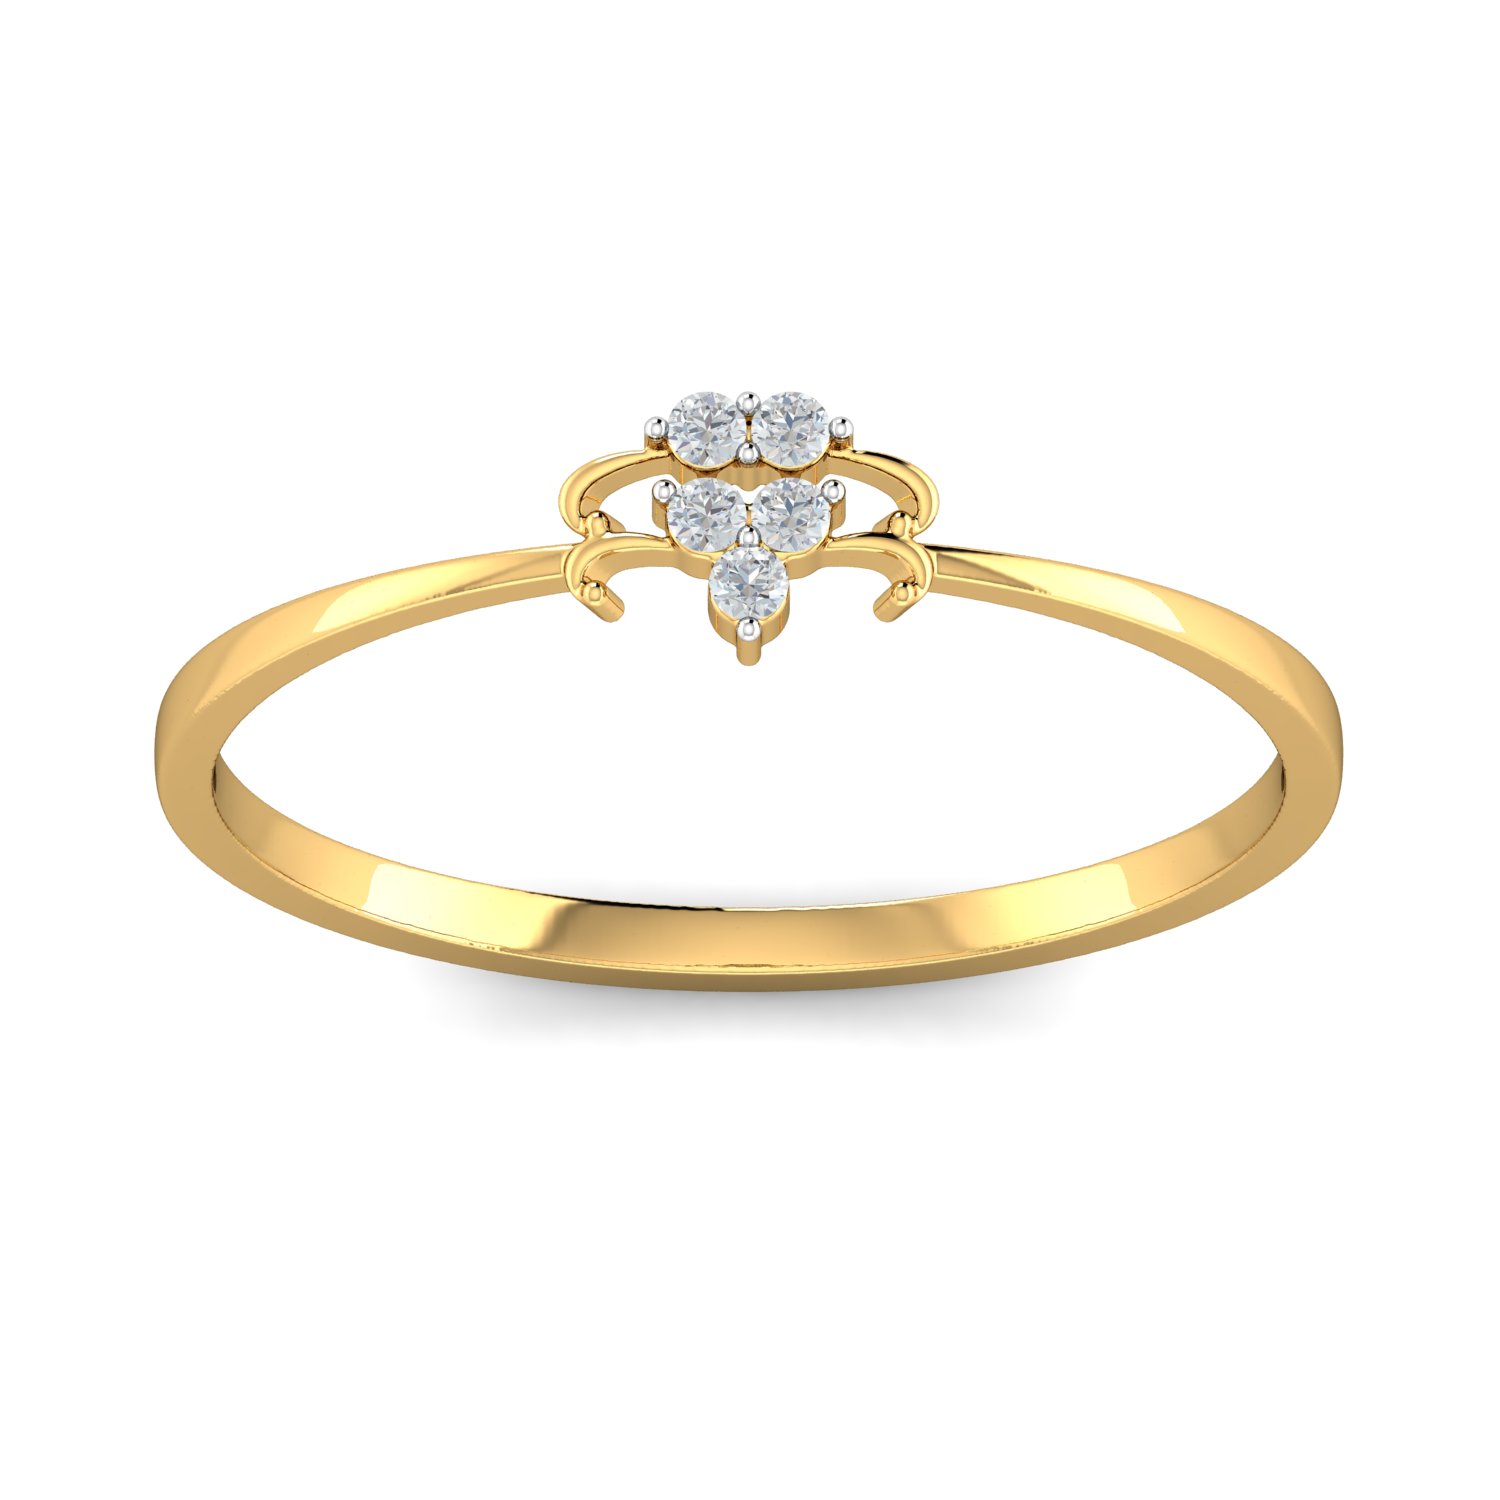 Spear Heads Solitaire Diamond Engagement Ring Online Jewellery Shopping  India | Yellow Gold 14K | Candere by Kalyan Jewellers